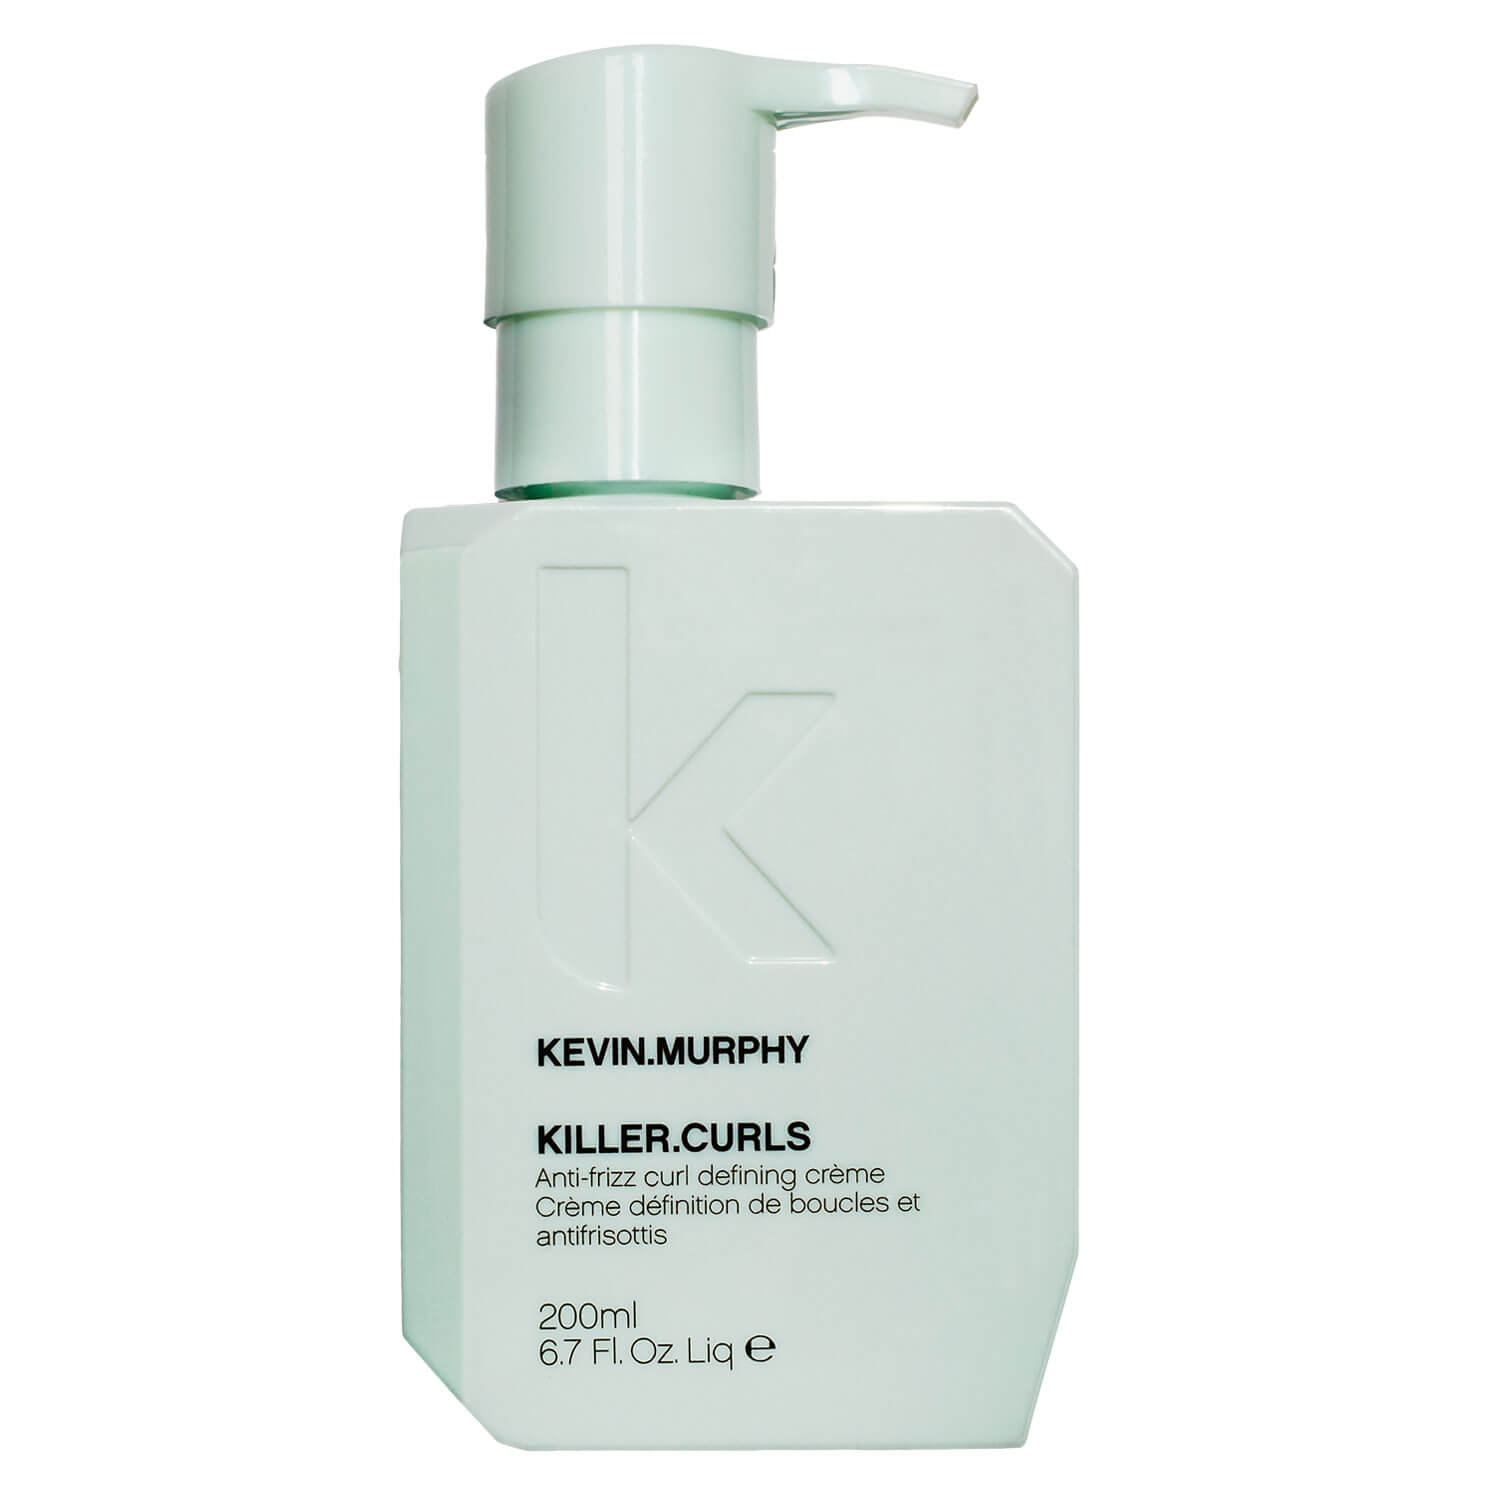 Product image from Killer Curls - Killer.Curls Anti-Frizz Creme